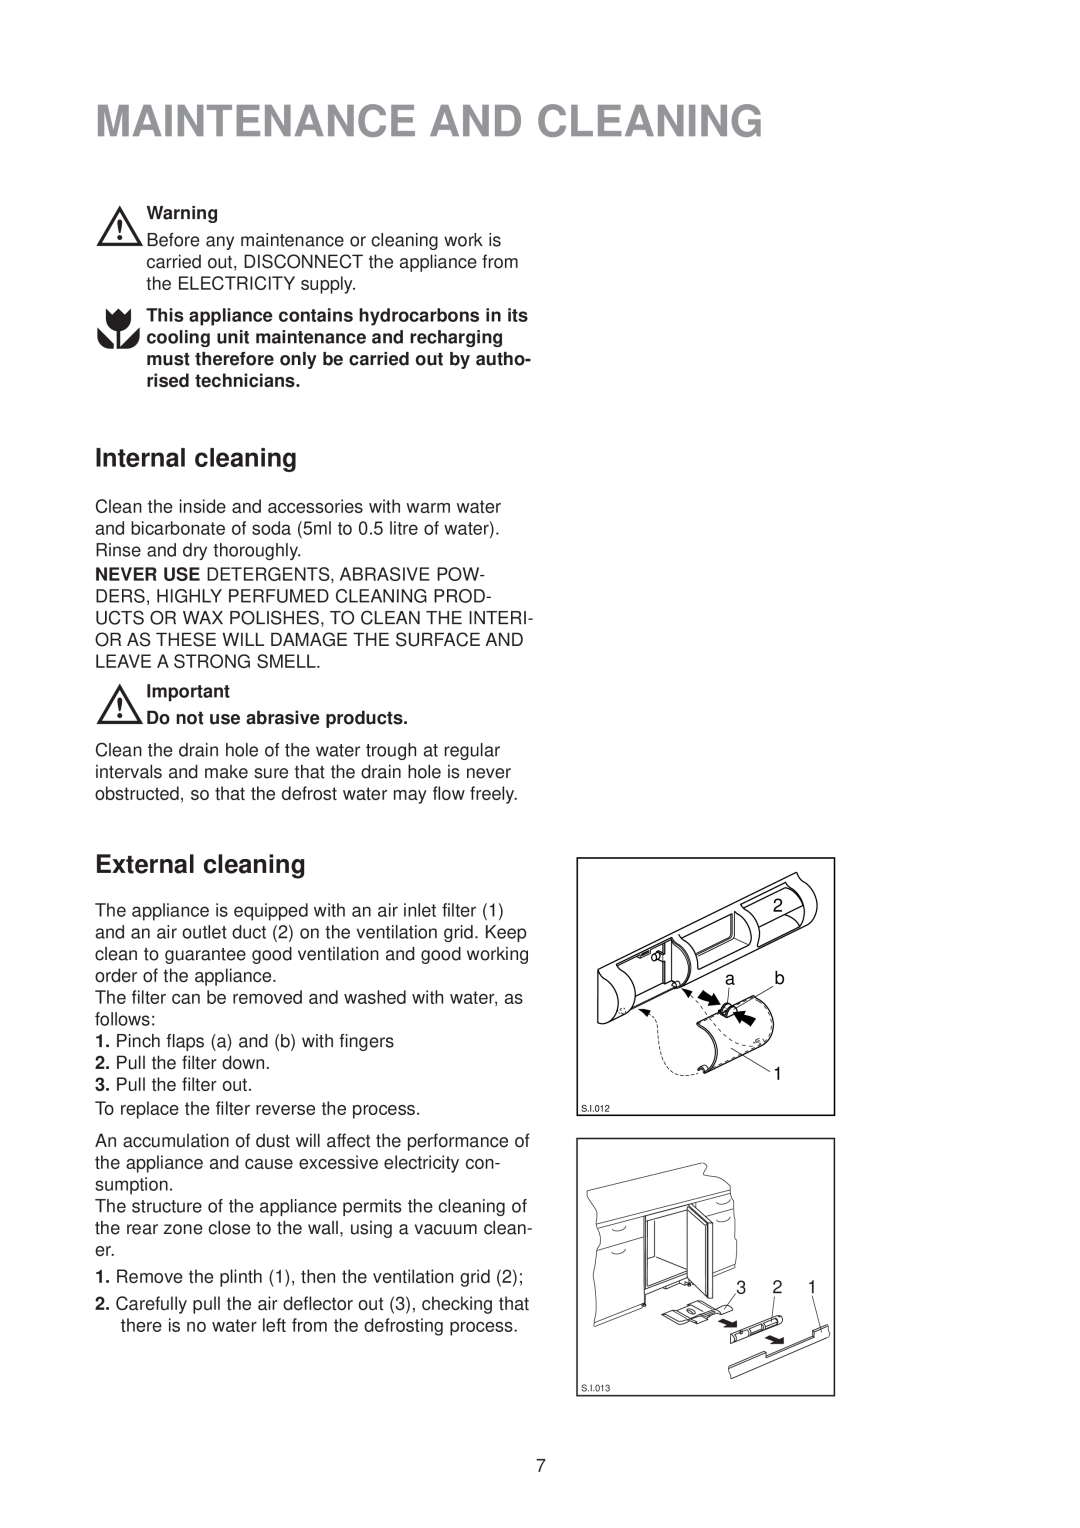 Zanussi ZU 9155 manual Maintenance And Cleaning, Internal cleaning, External cleaning, Do not use abrasive products 